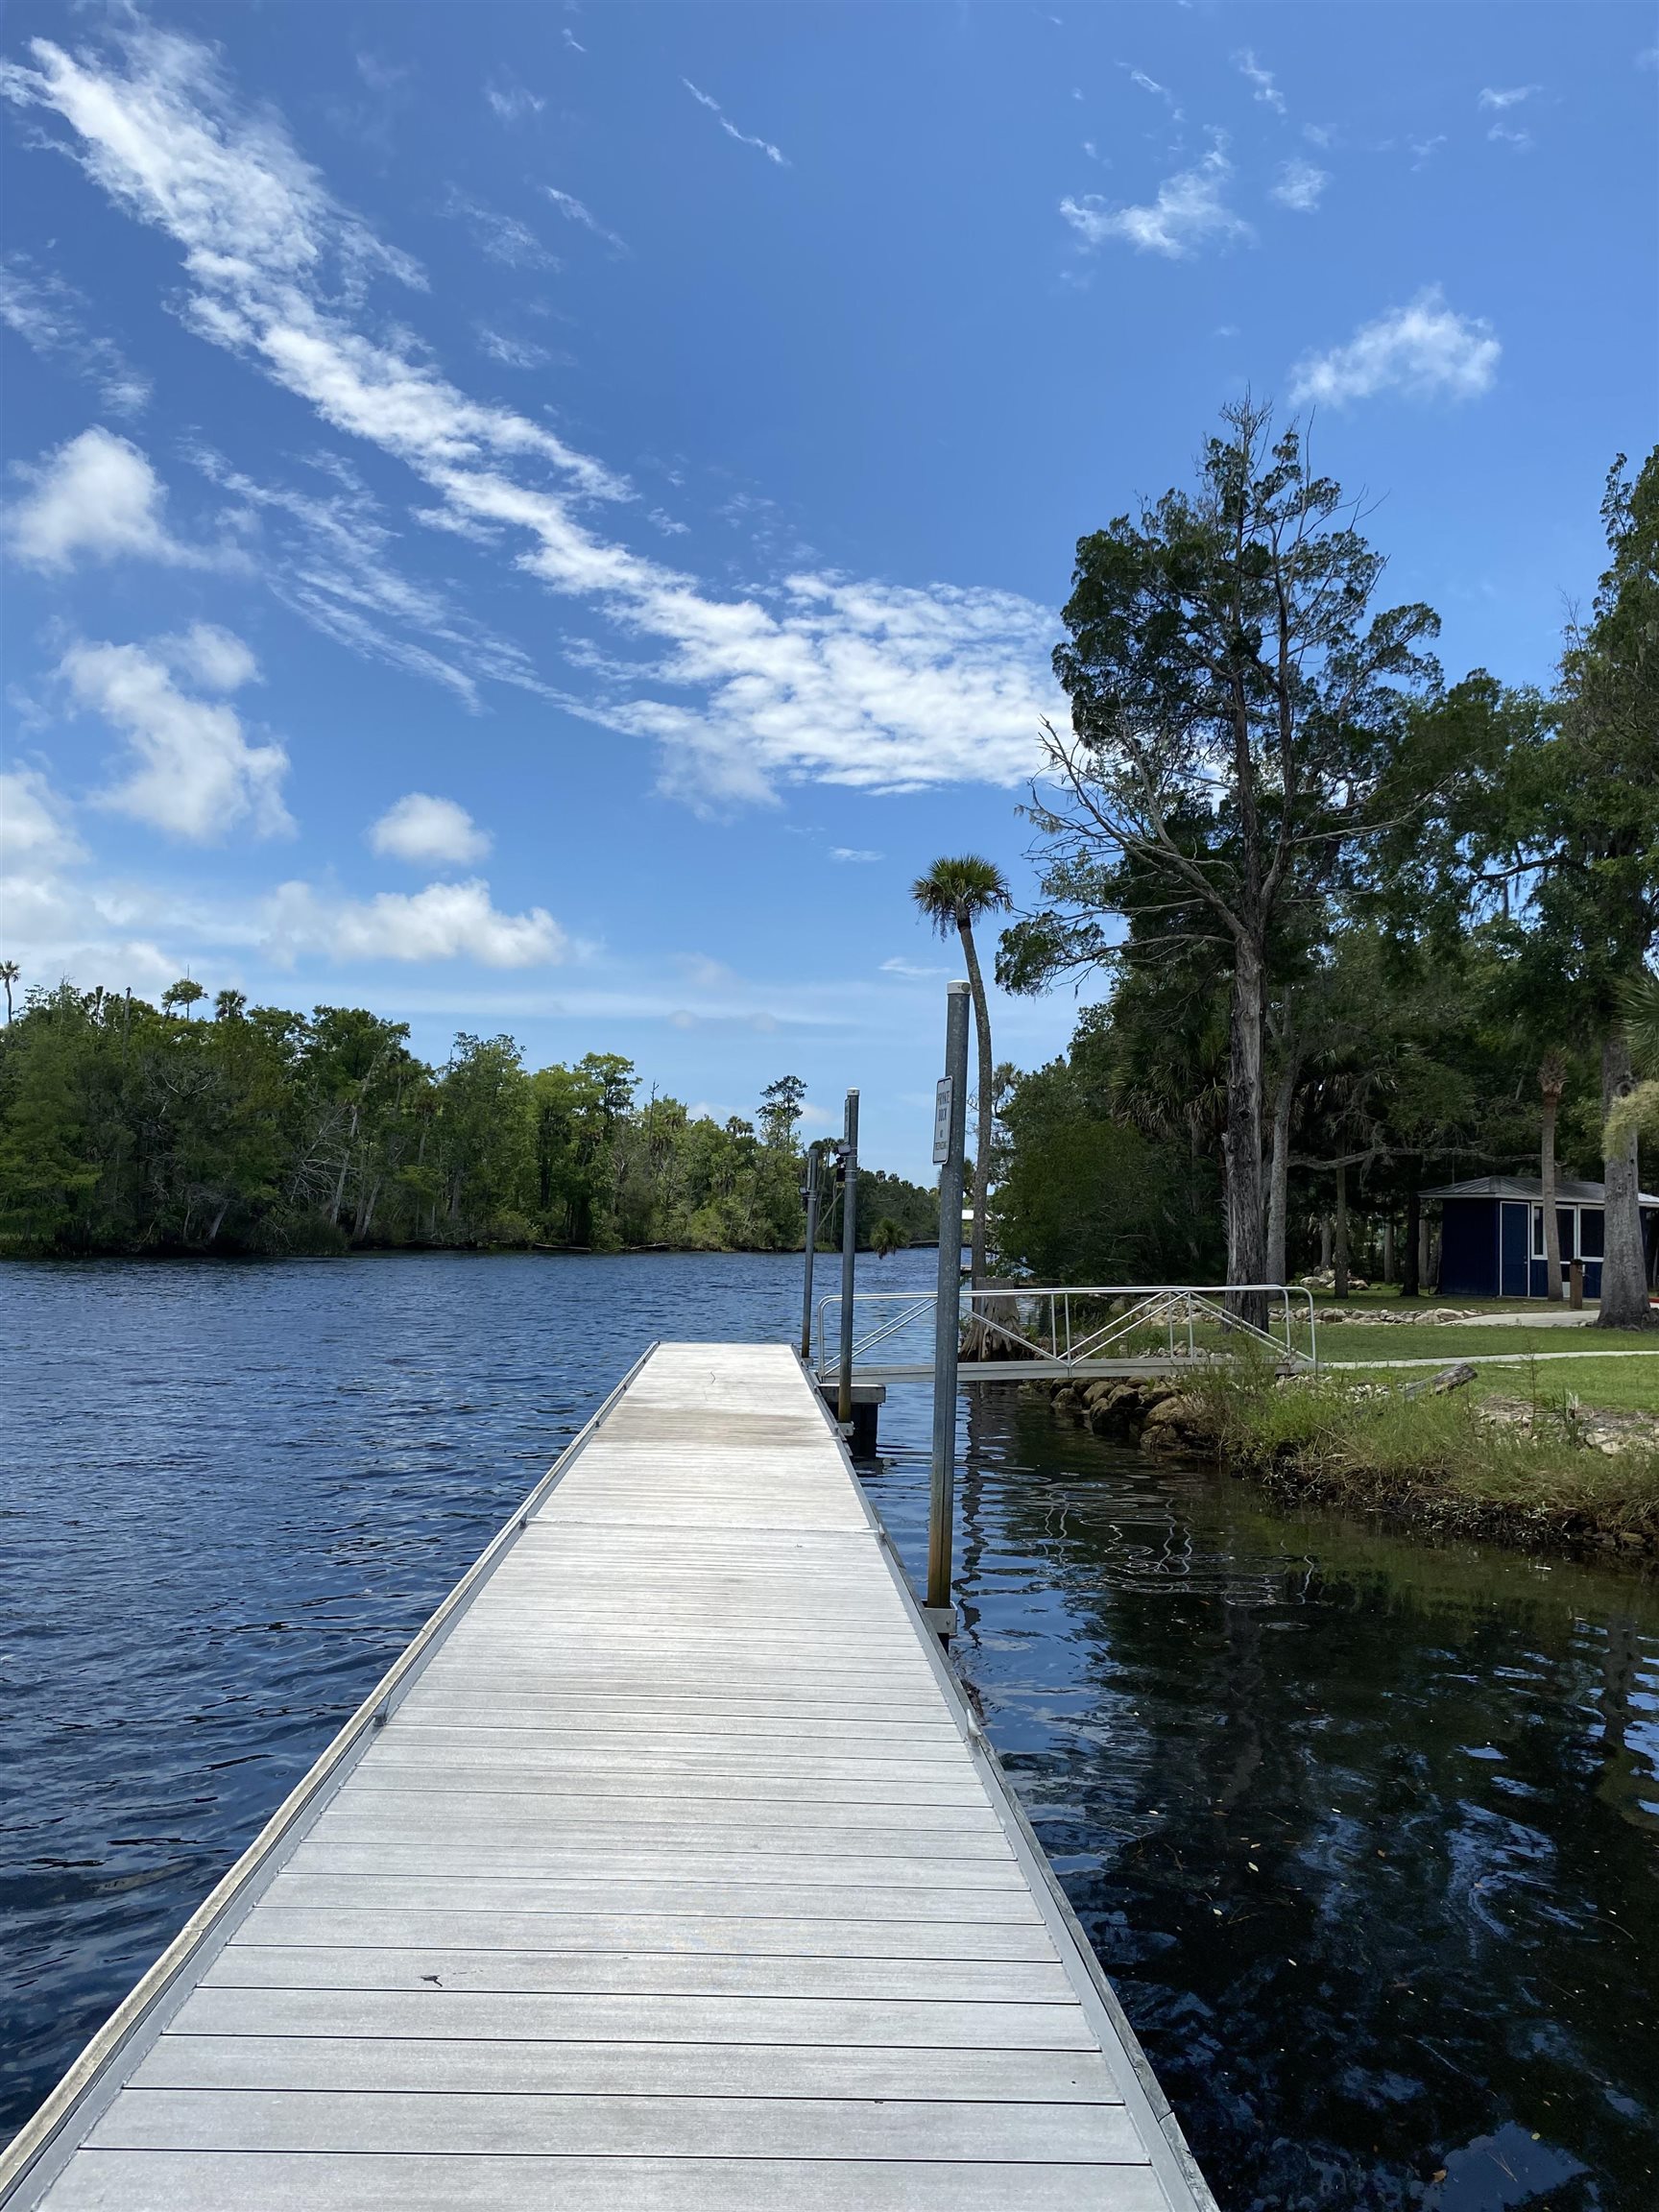 1258 RIVERS BEND,STEINHATCHEE,Florida 32359,Lots and land,RIVERS BEND,364147